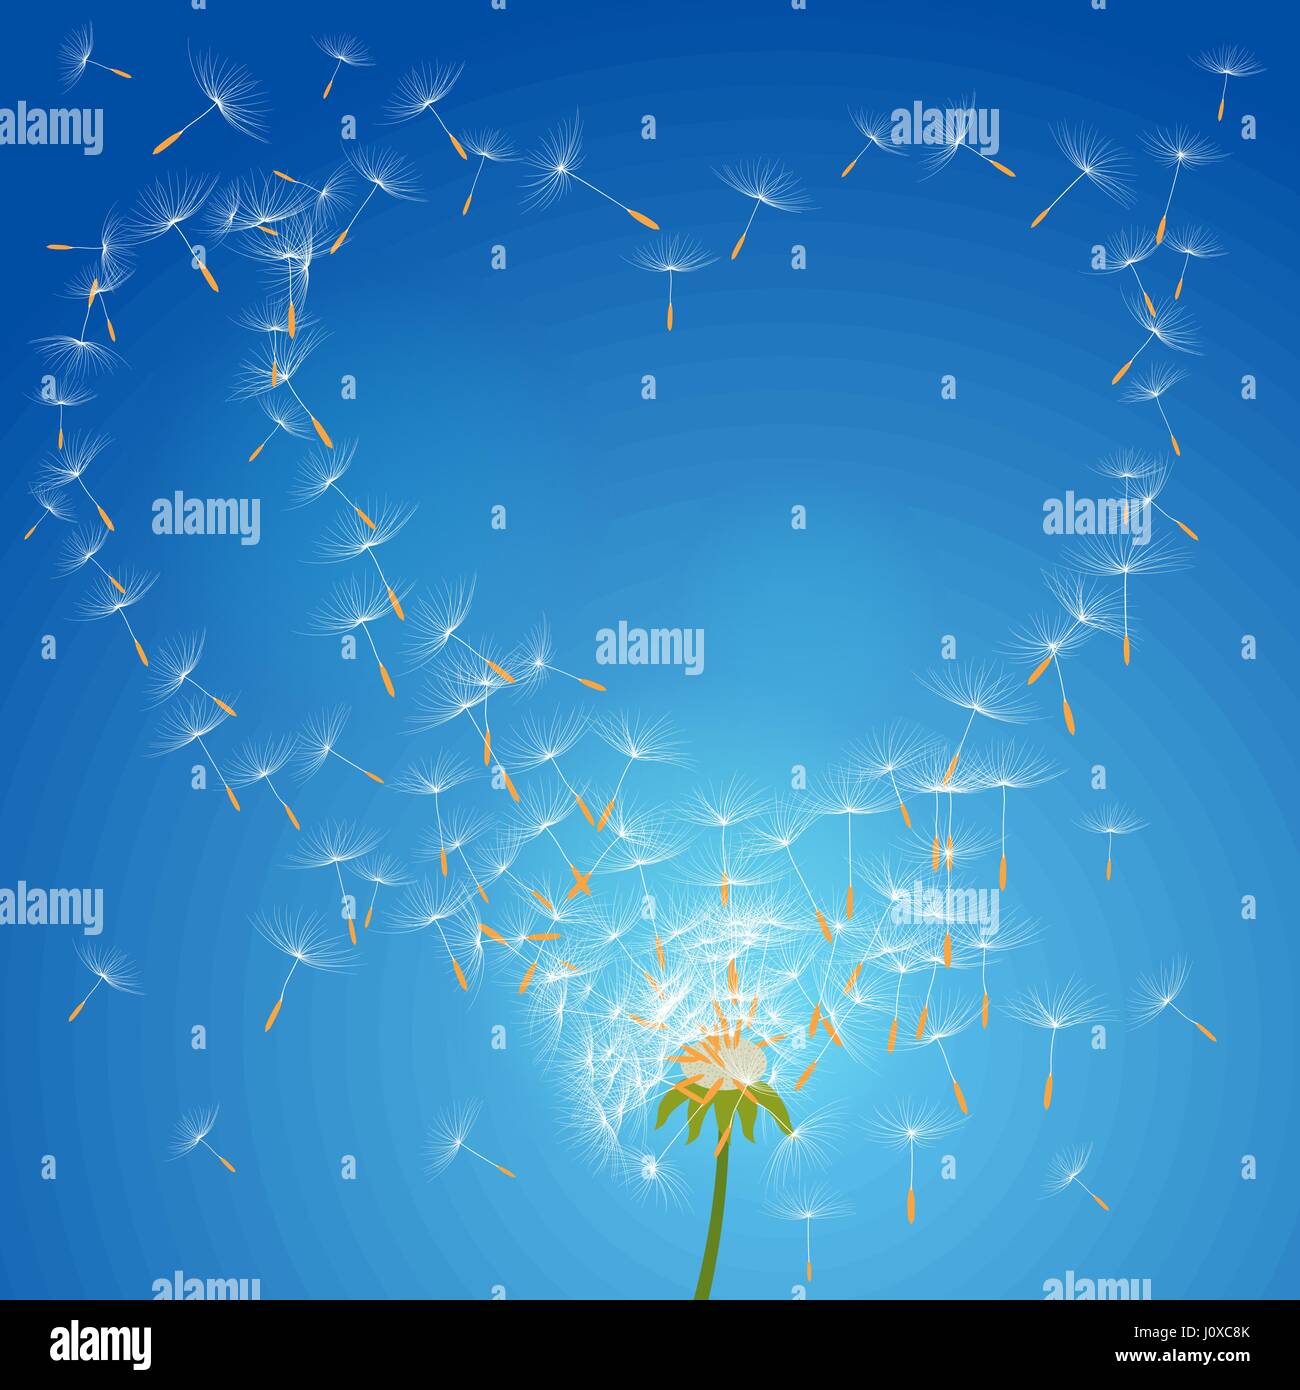 Vector flower dandelion on a wind loses the integrity forming loveai Stock Vector